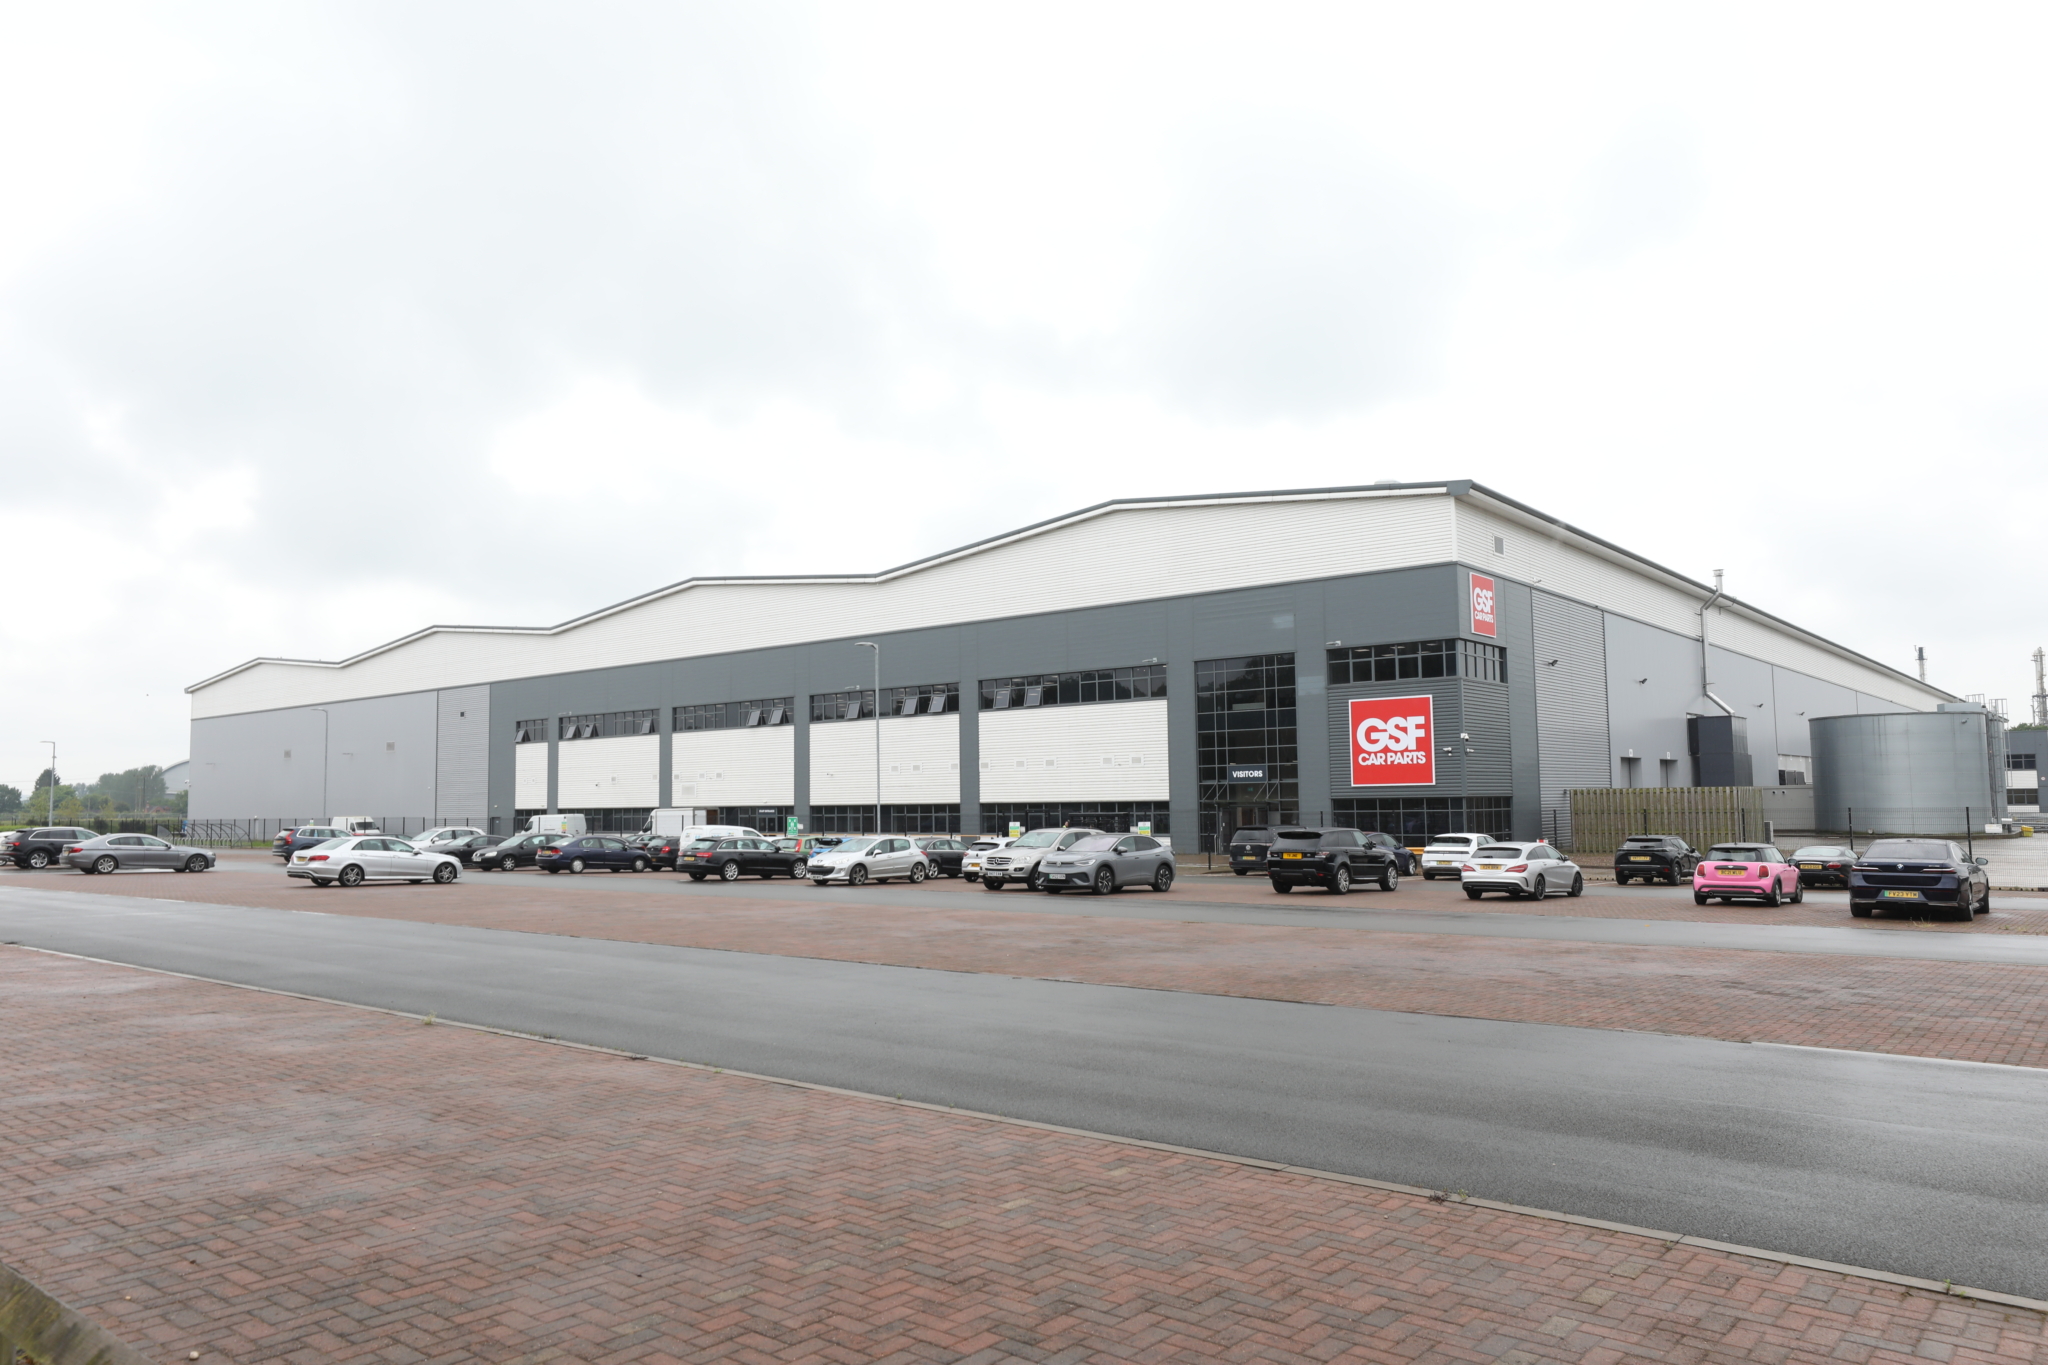 GSF Car Parts to open National Distribution Centre